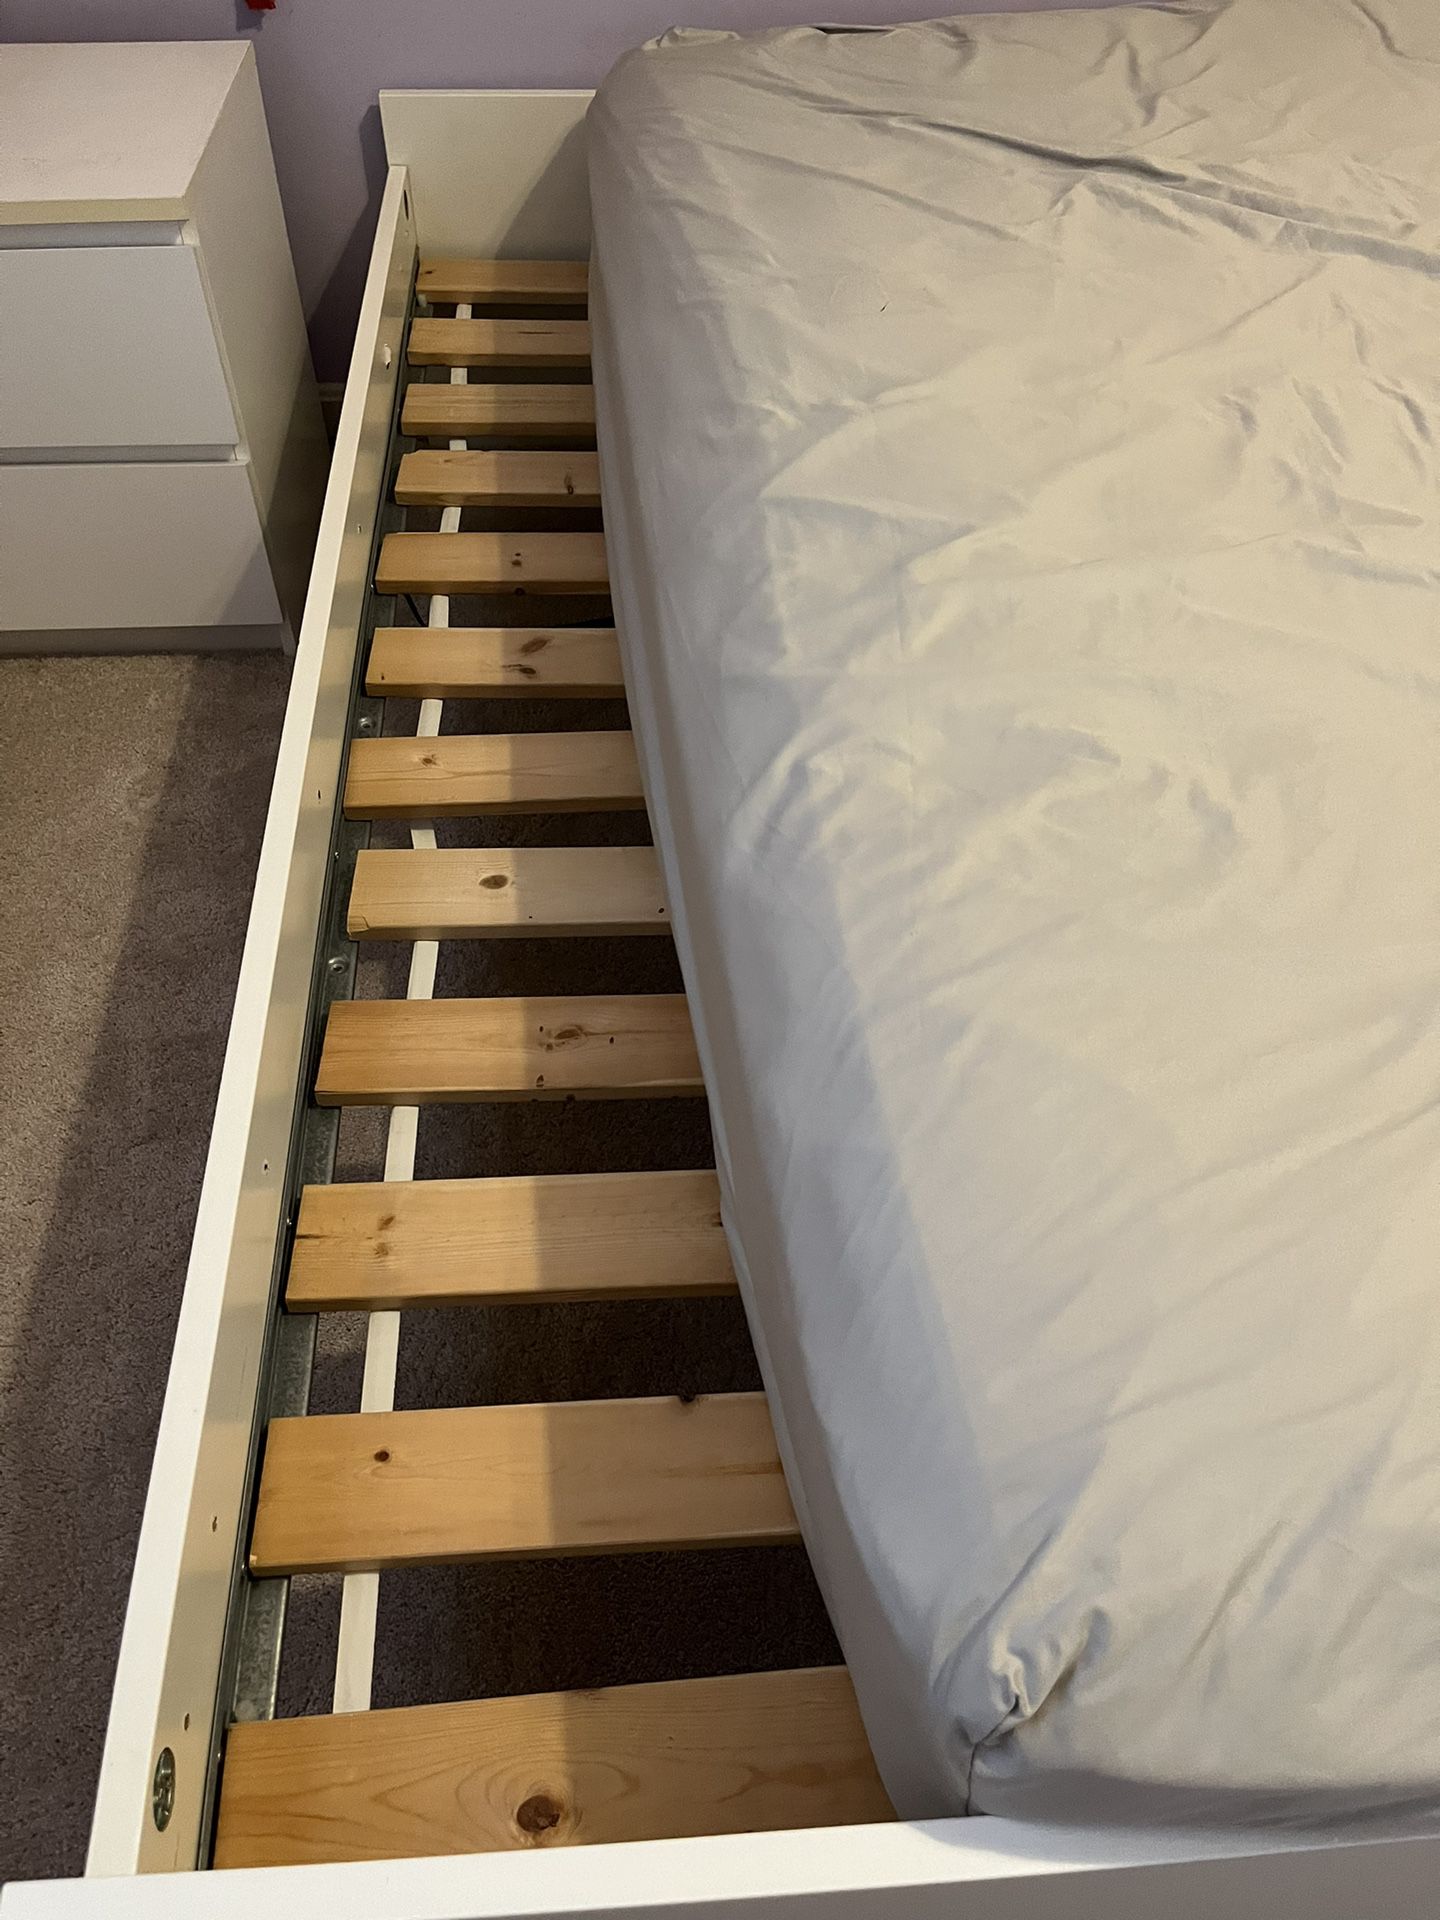 Queen bed (Ikea) with slats and mattress